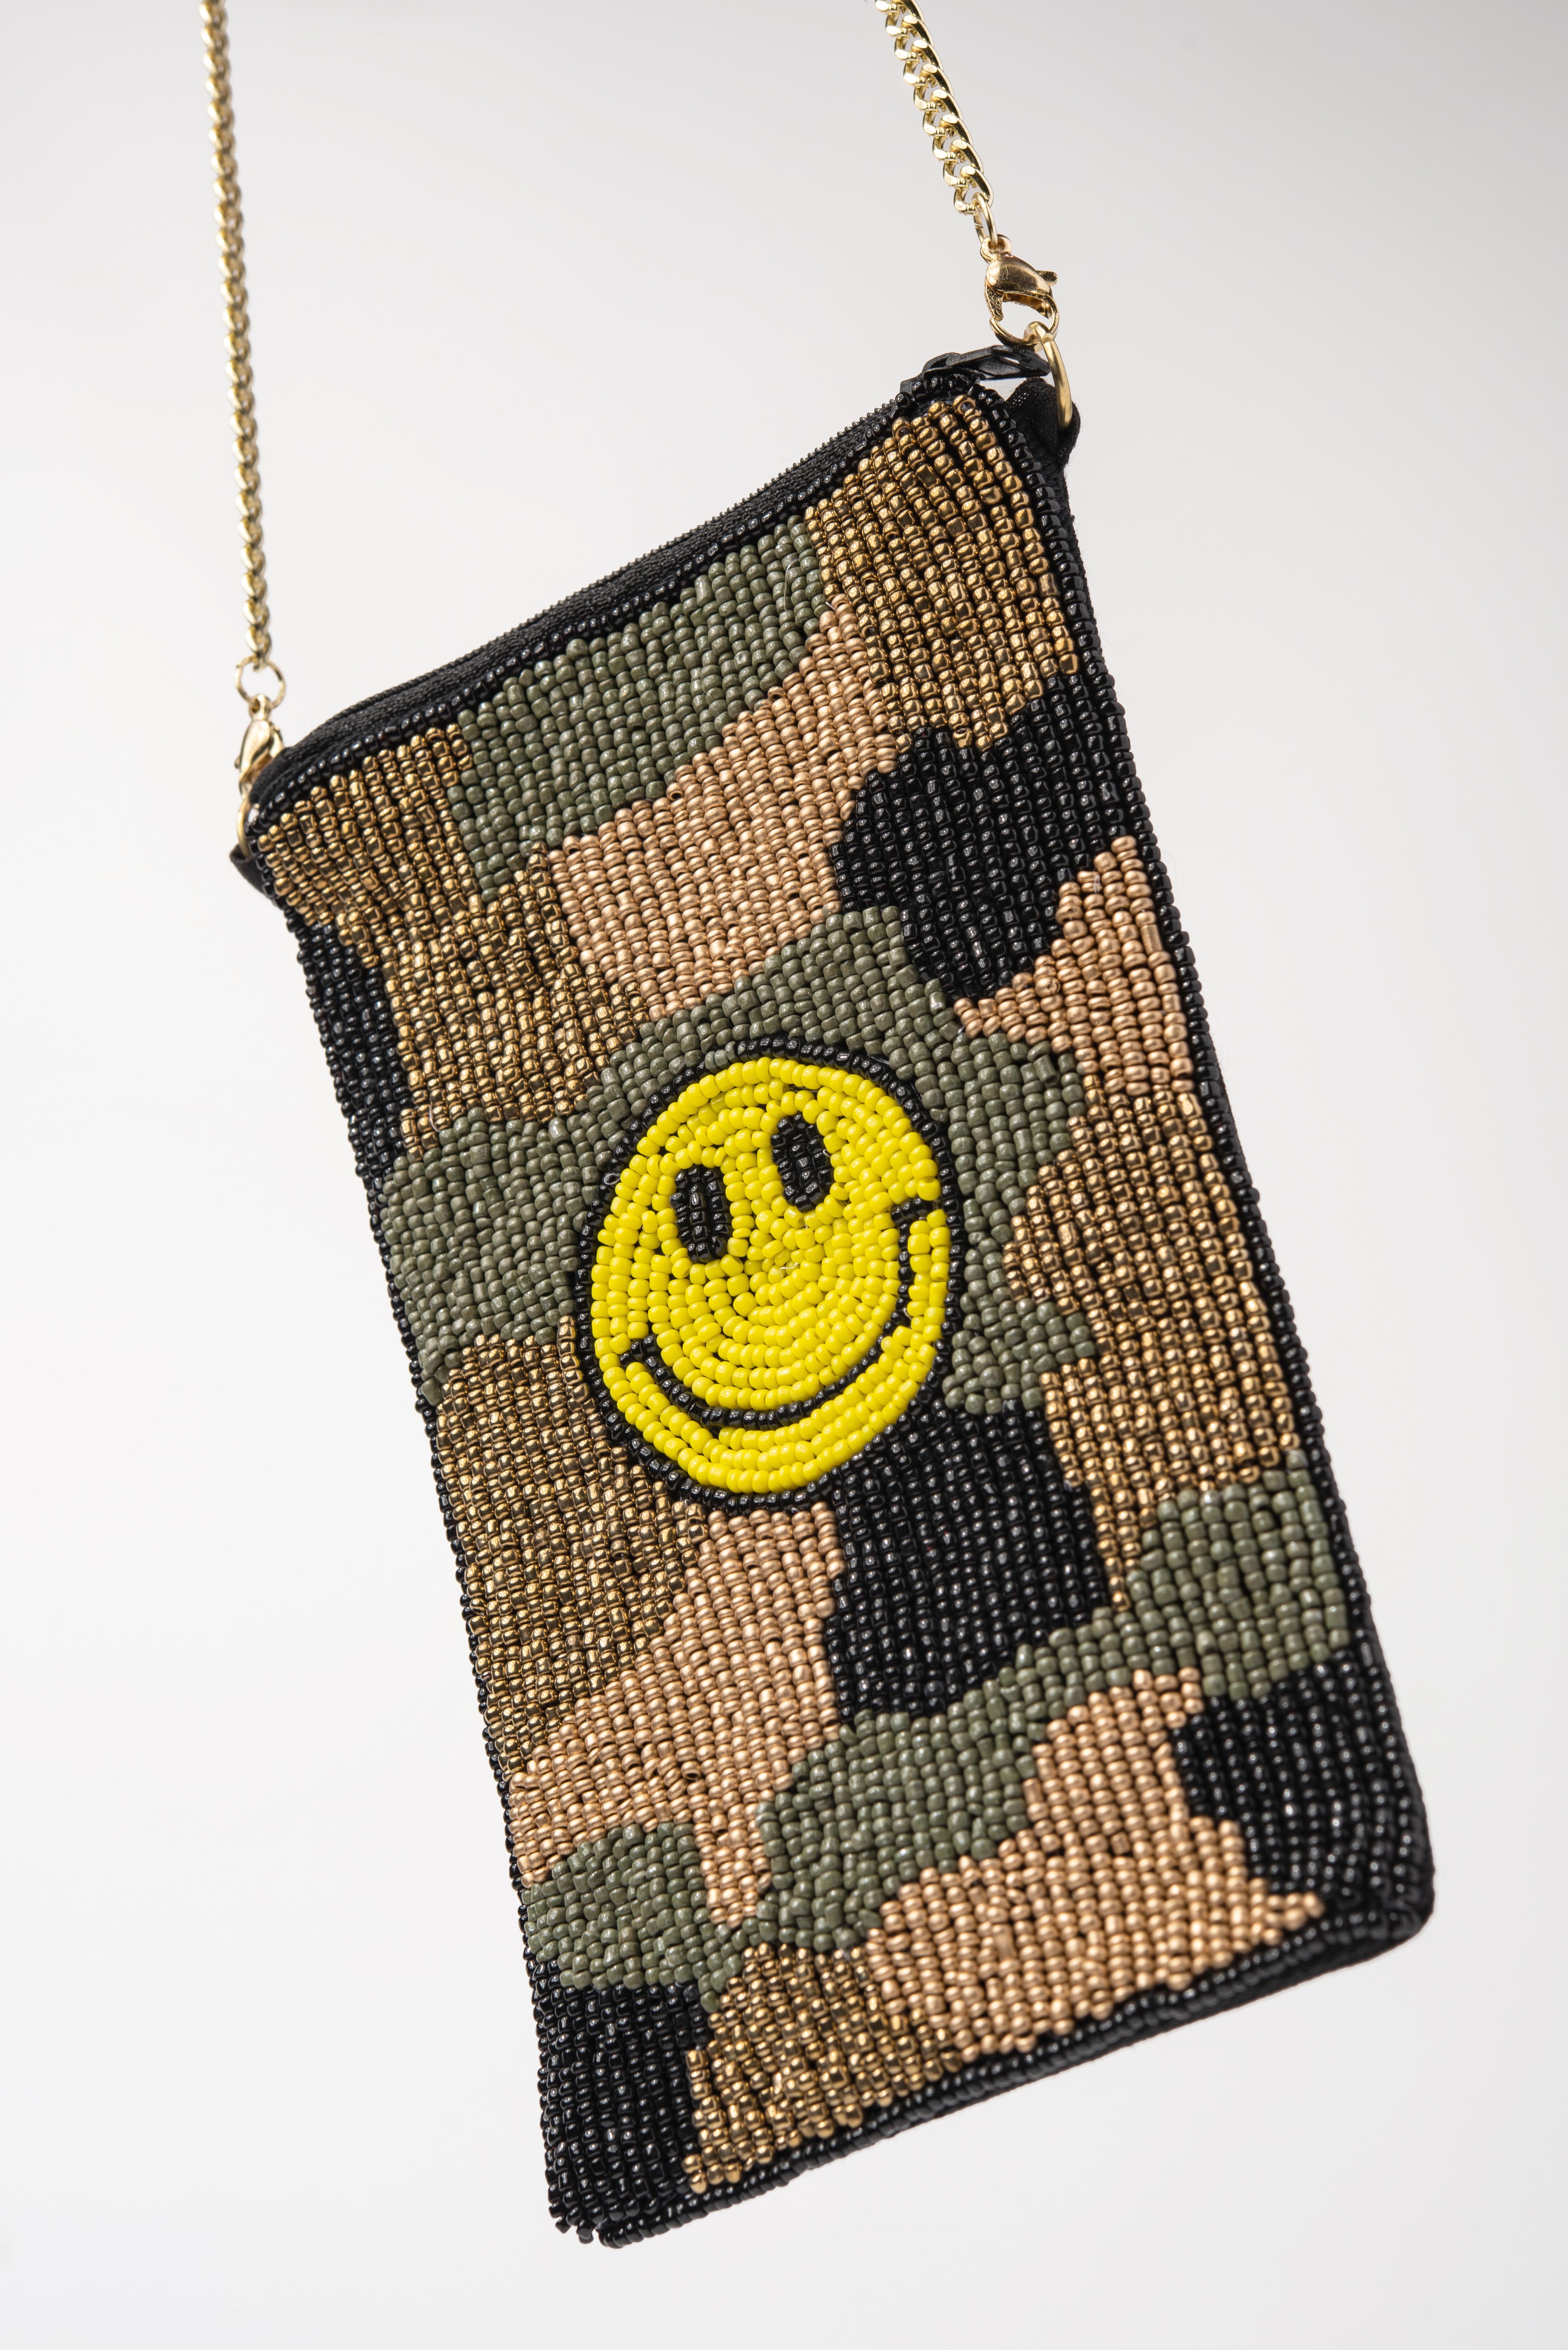 Smiley Face Thank You Bags (500 Bags/Case) – Boston North Company Store